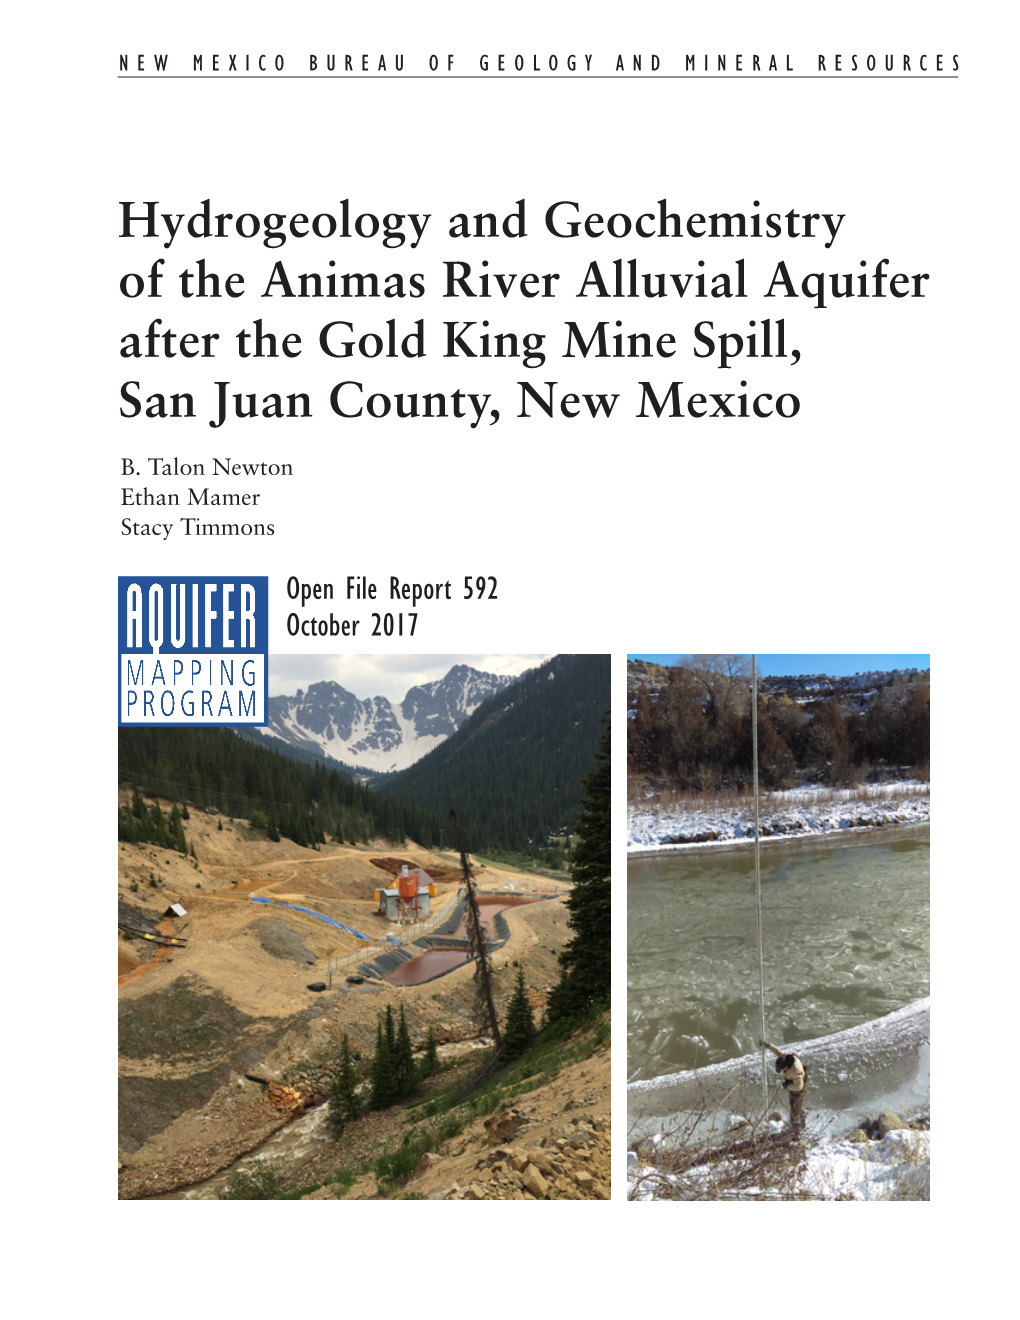 Hydrogeology and Geochemistry of the Animas River Alluvial Aquifer After the Gold King Mine Spill, San Juan County, New Mexico